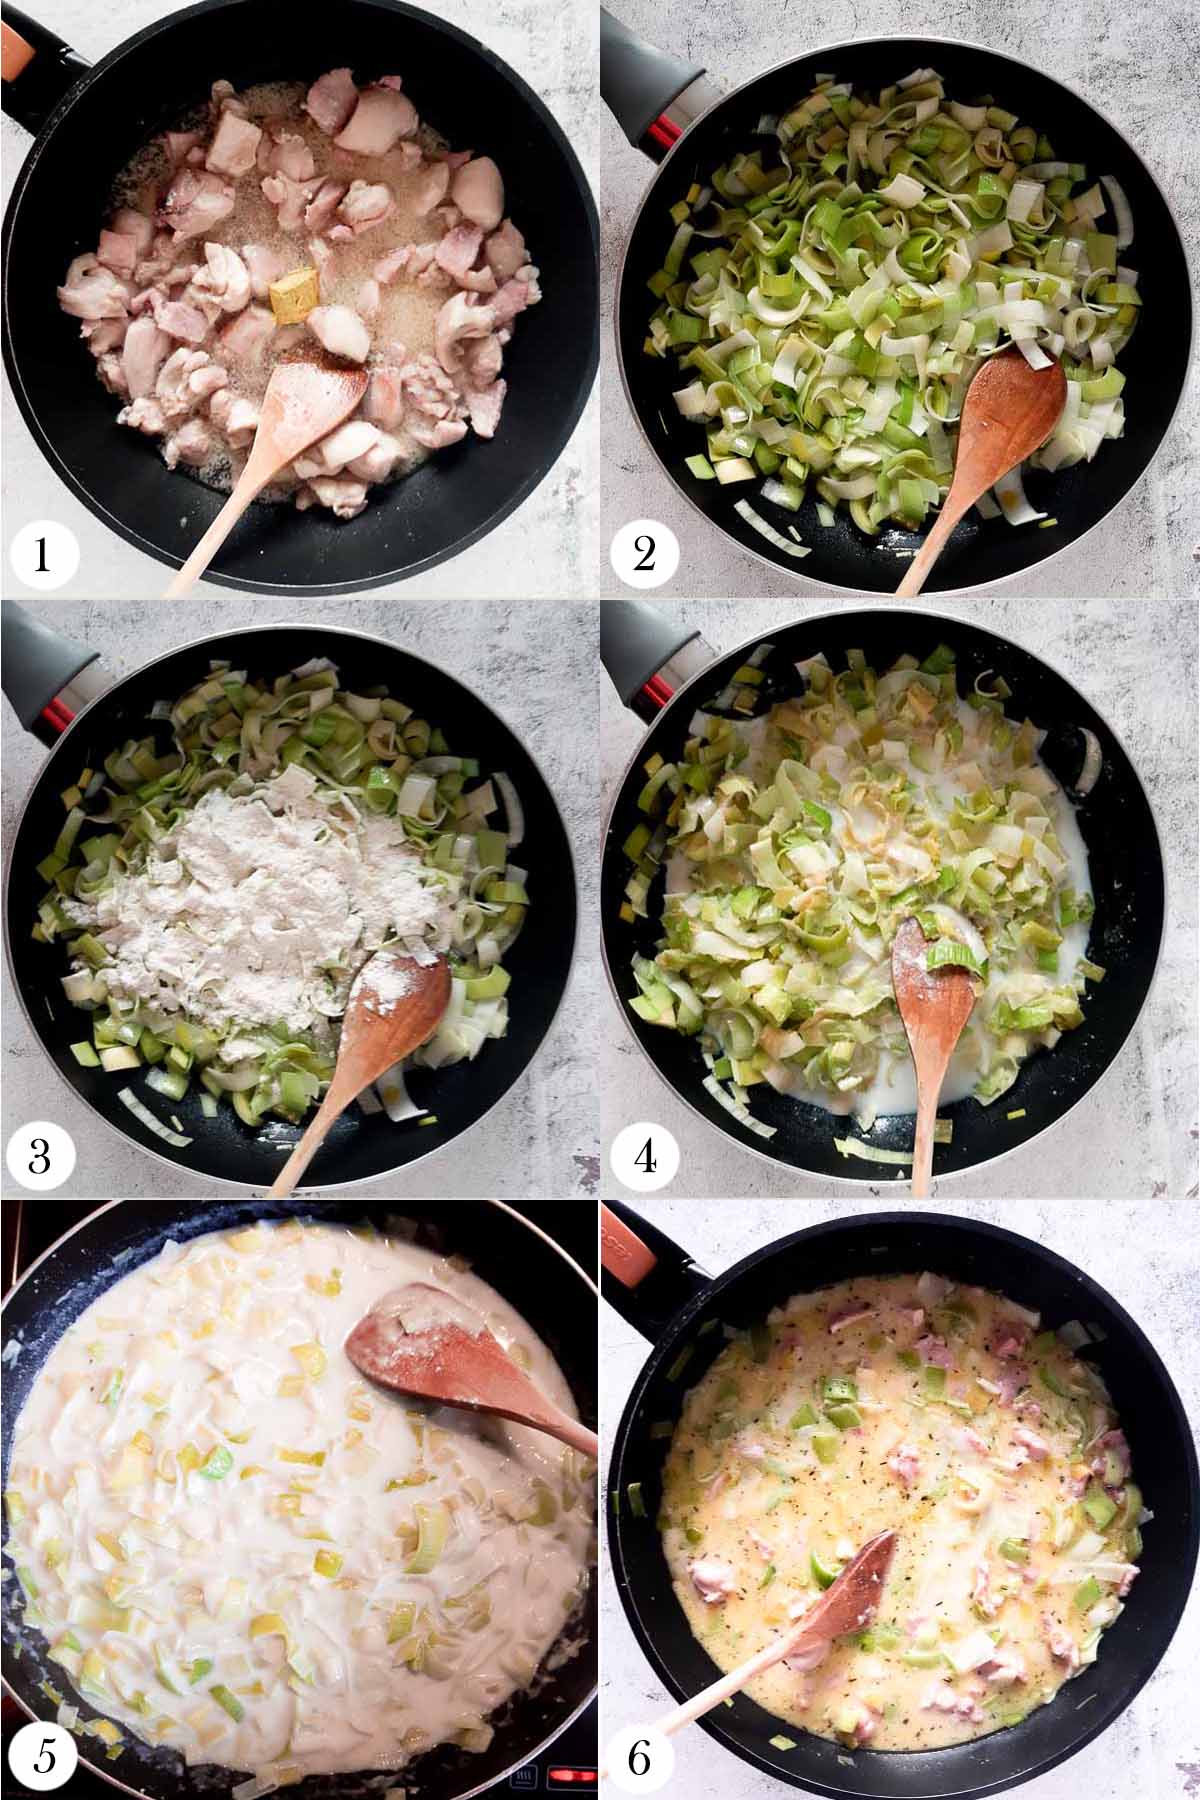 A collage of six photos showing how to make chicken, ham and leek pie filling. Top left: Diced chicken and ham is cooked in a pan with chicken stock. Top right: Sliced leek is fried in a pan with butter. Middle left: Plain flour is added to the pan with fried leek. Middle right: The mixture is stirred and milk is being added. Bottom left: Thickened bechamel sauce with leek. Bottom right: The bechamel with leek is mixed with cooked chicken and ham.